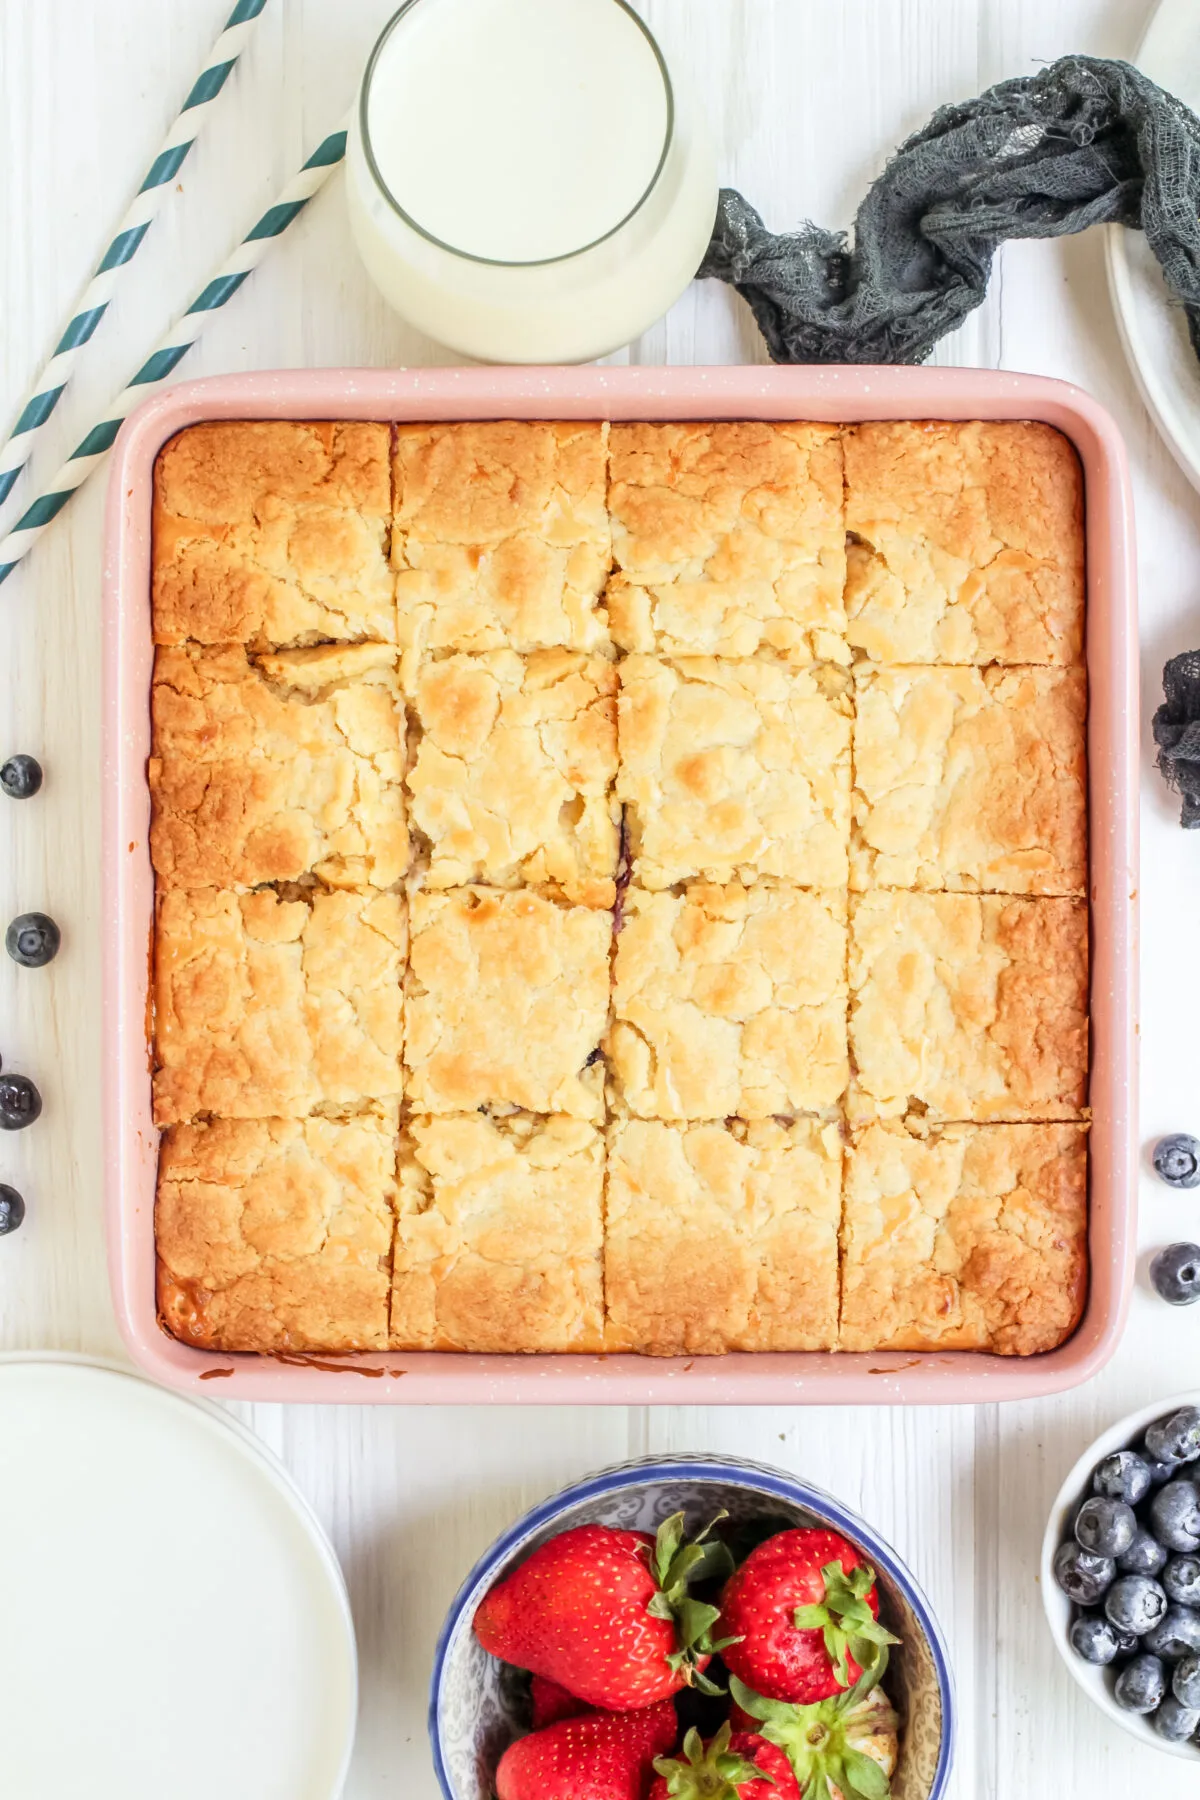 Craving something sweet and fruity? Try this easy recipe for delicious blueberry cream cheese bars made with cake mix and pie filling.